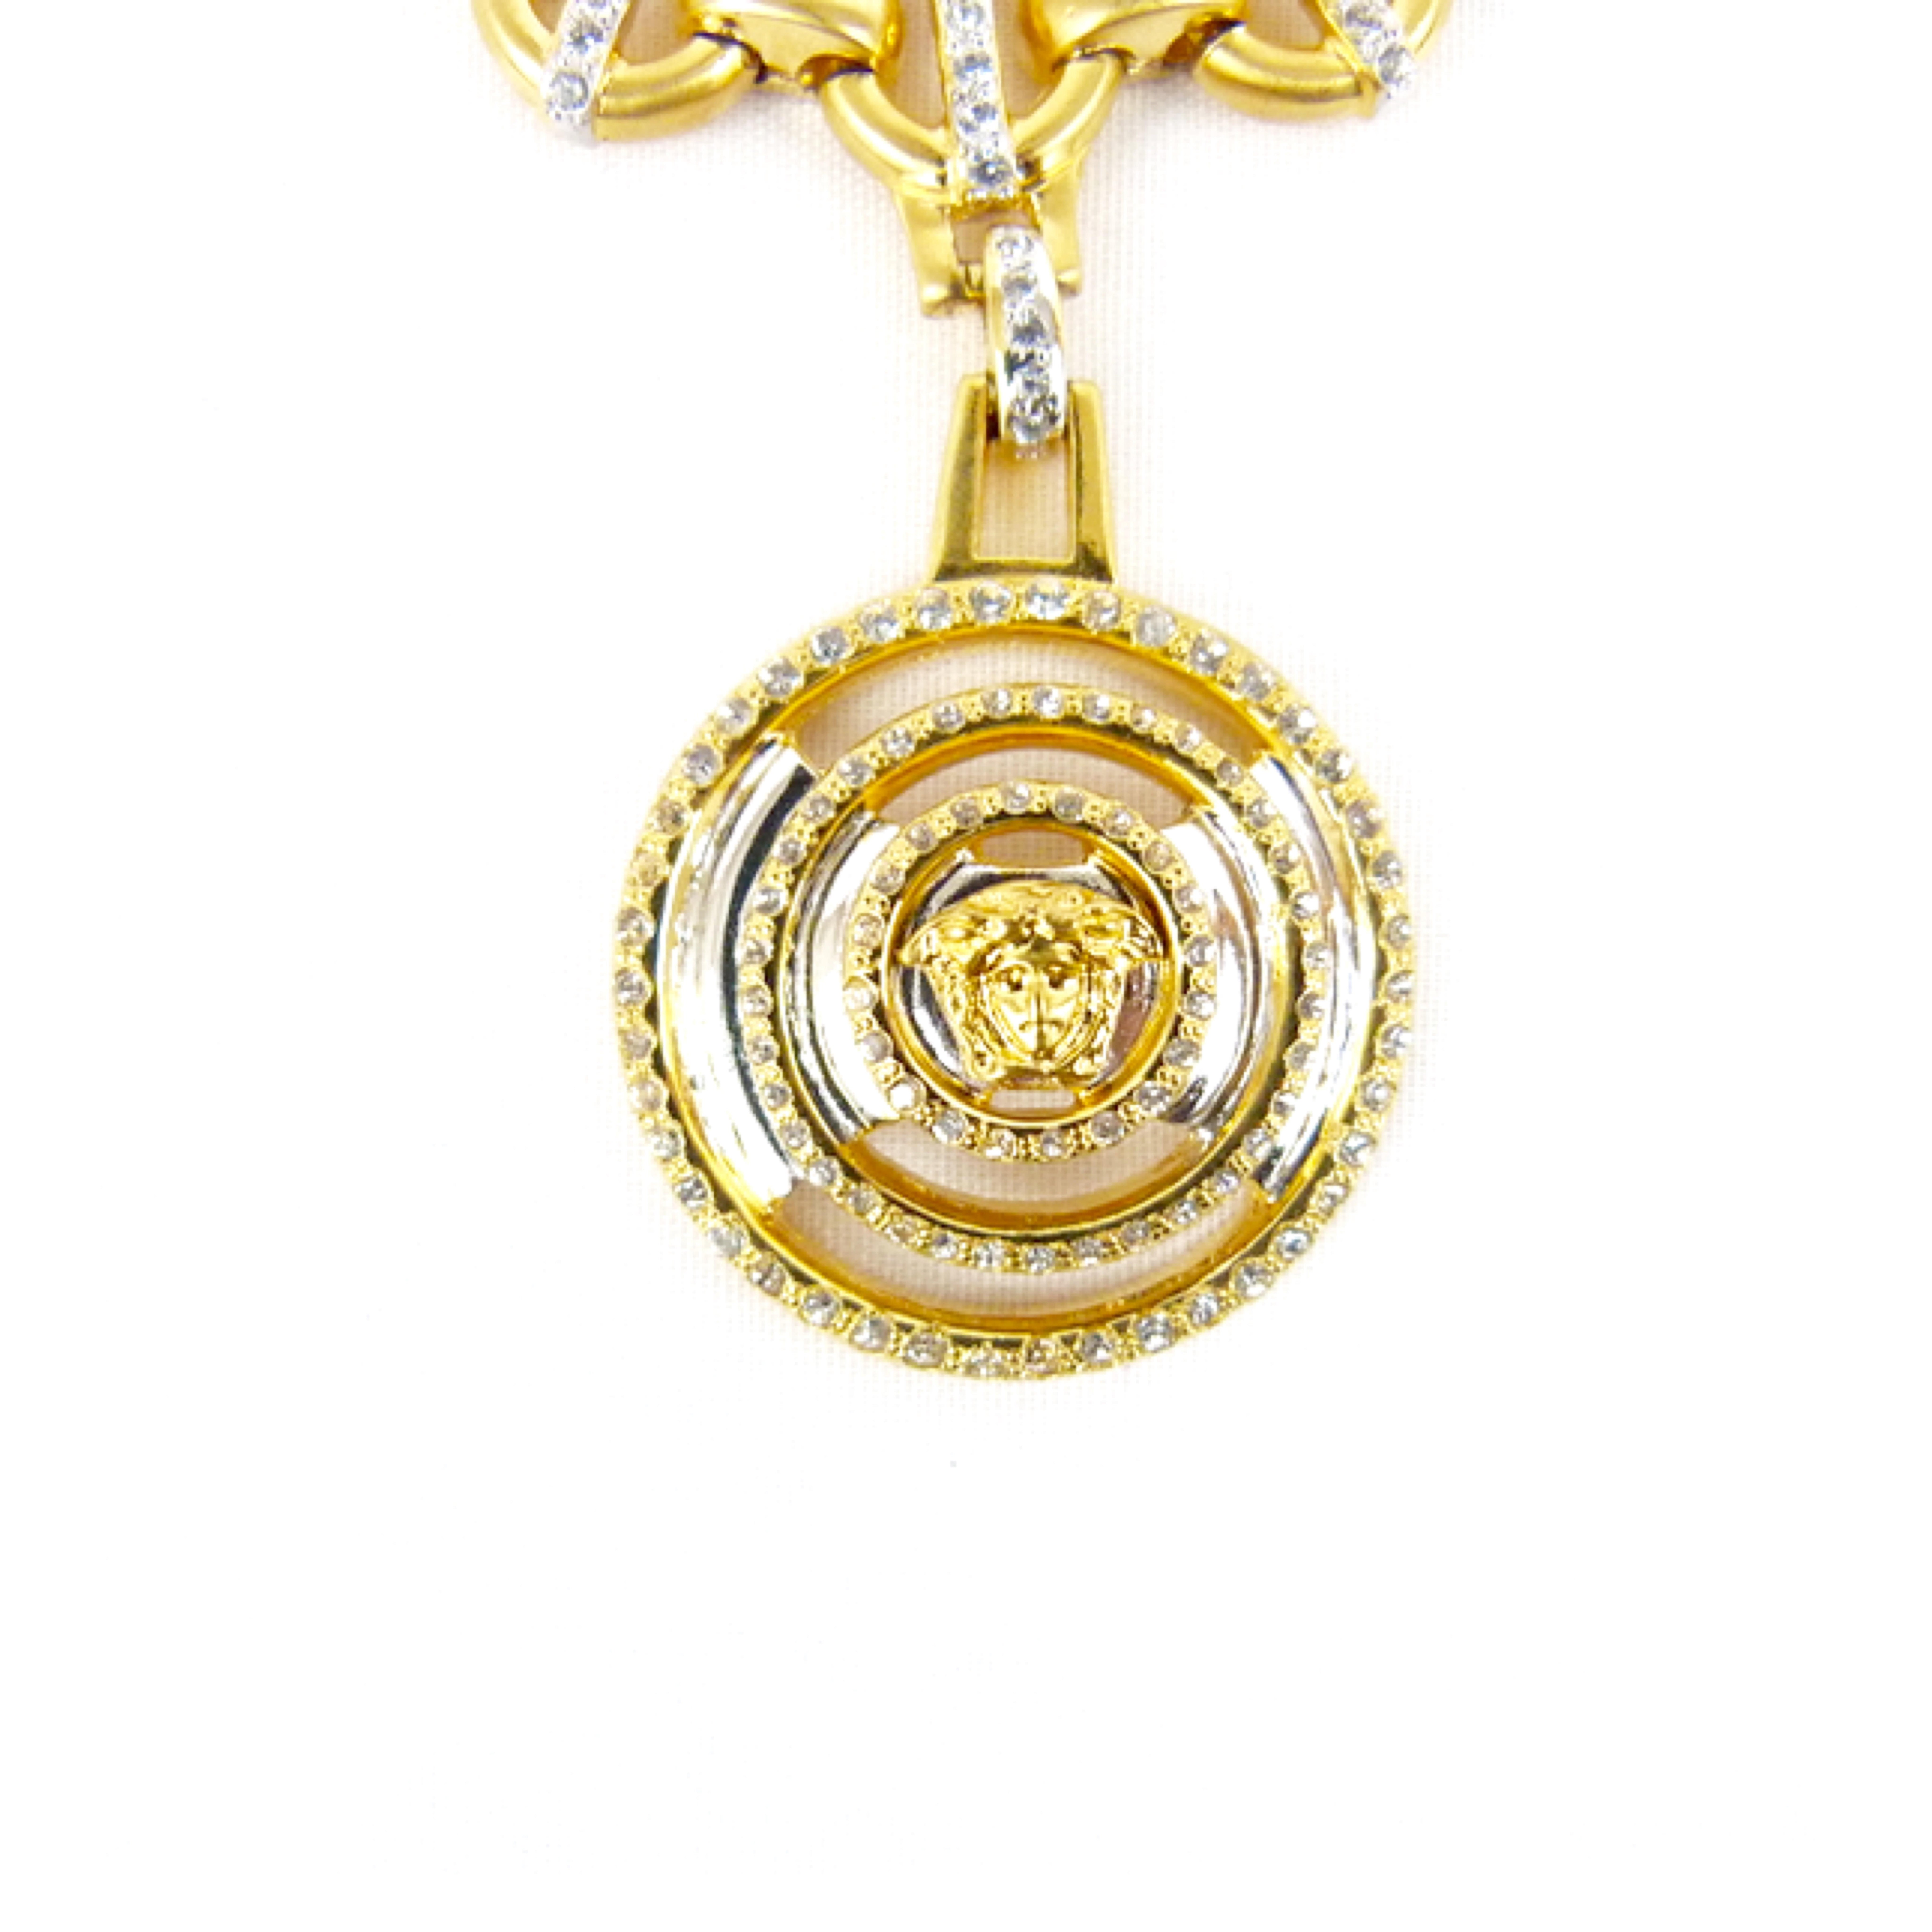 Women's or Men's Gianni Versace 1990s gold circular necklace with medusa head pendant 